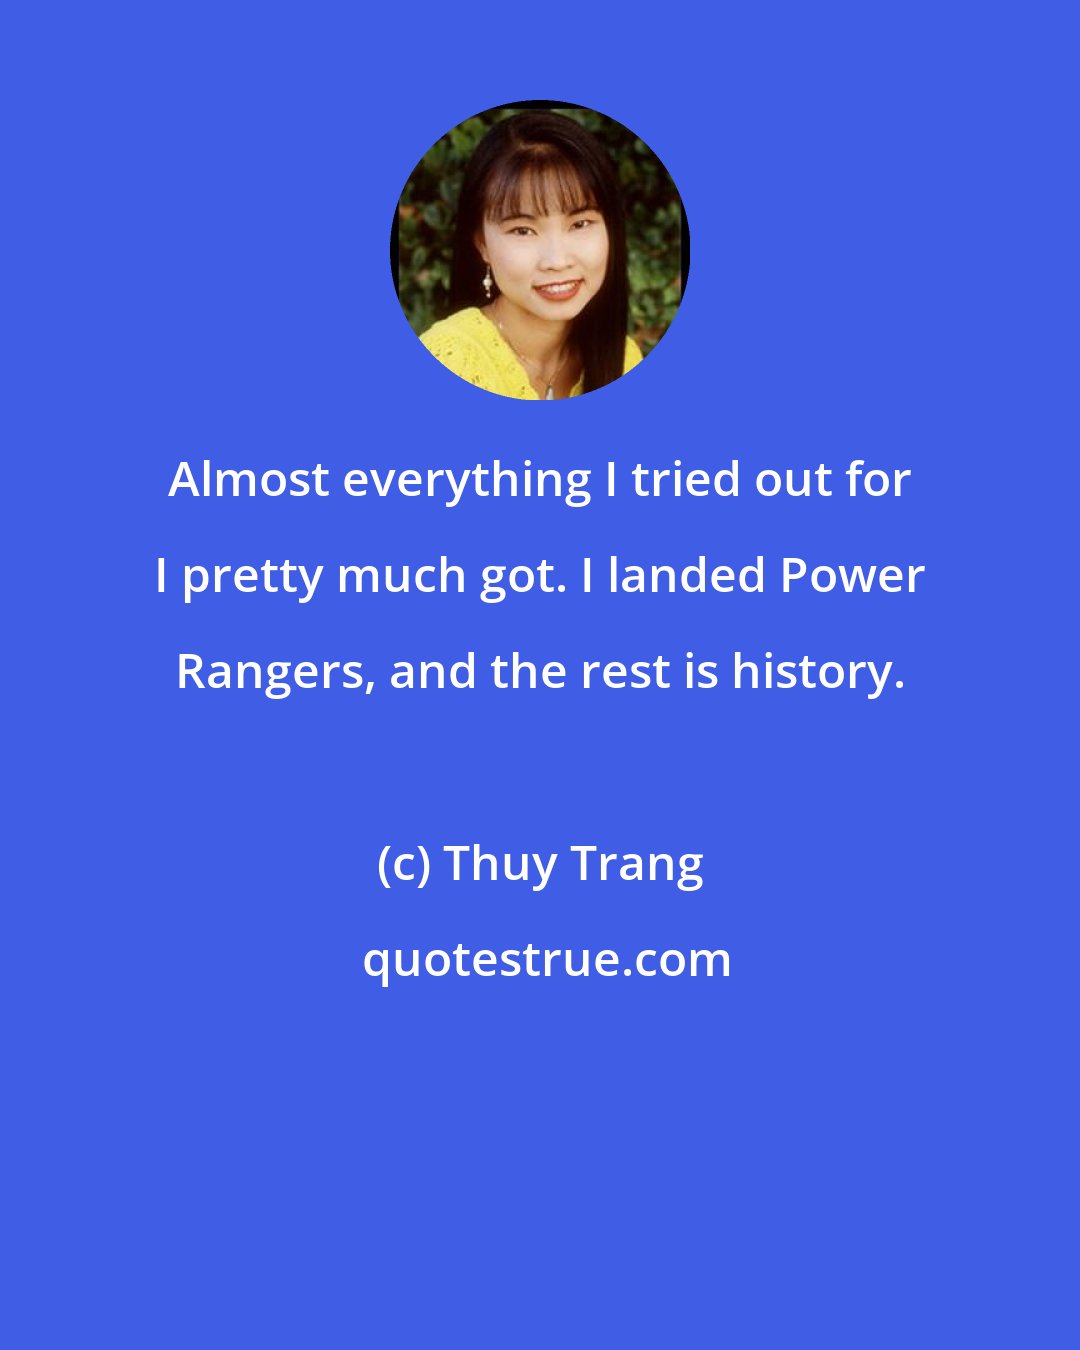 Thuy Trang: Almost everything I tried out for I pretty much got. I landed Power Rangers, and the rest is history.